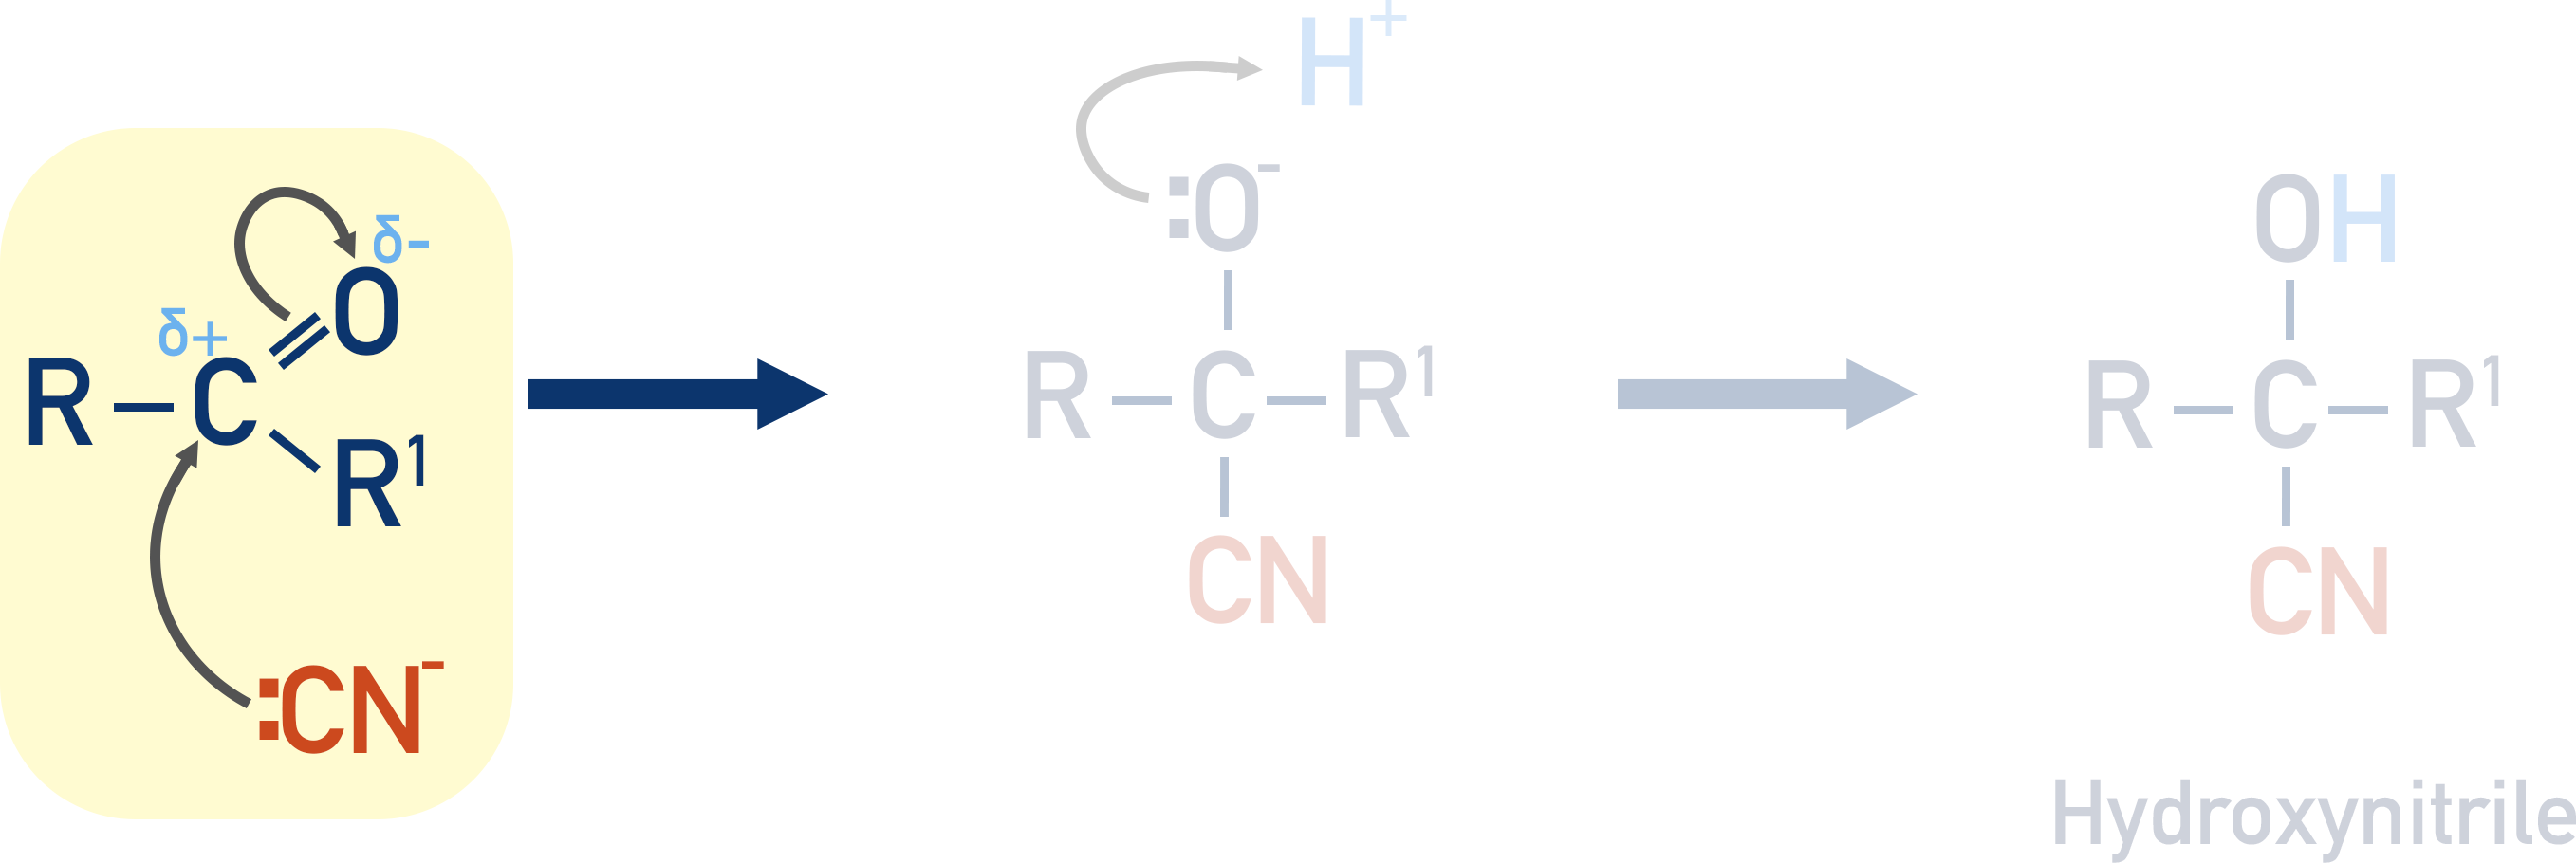 nucleophilic addition mechanism of potassium cyanide to carbonyl hydroxynitrile first step